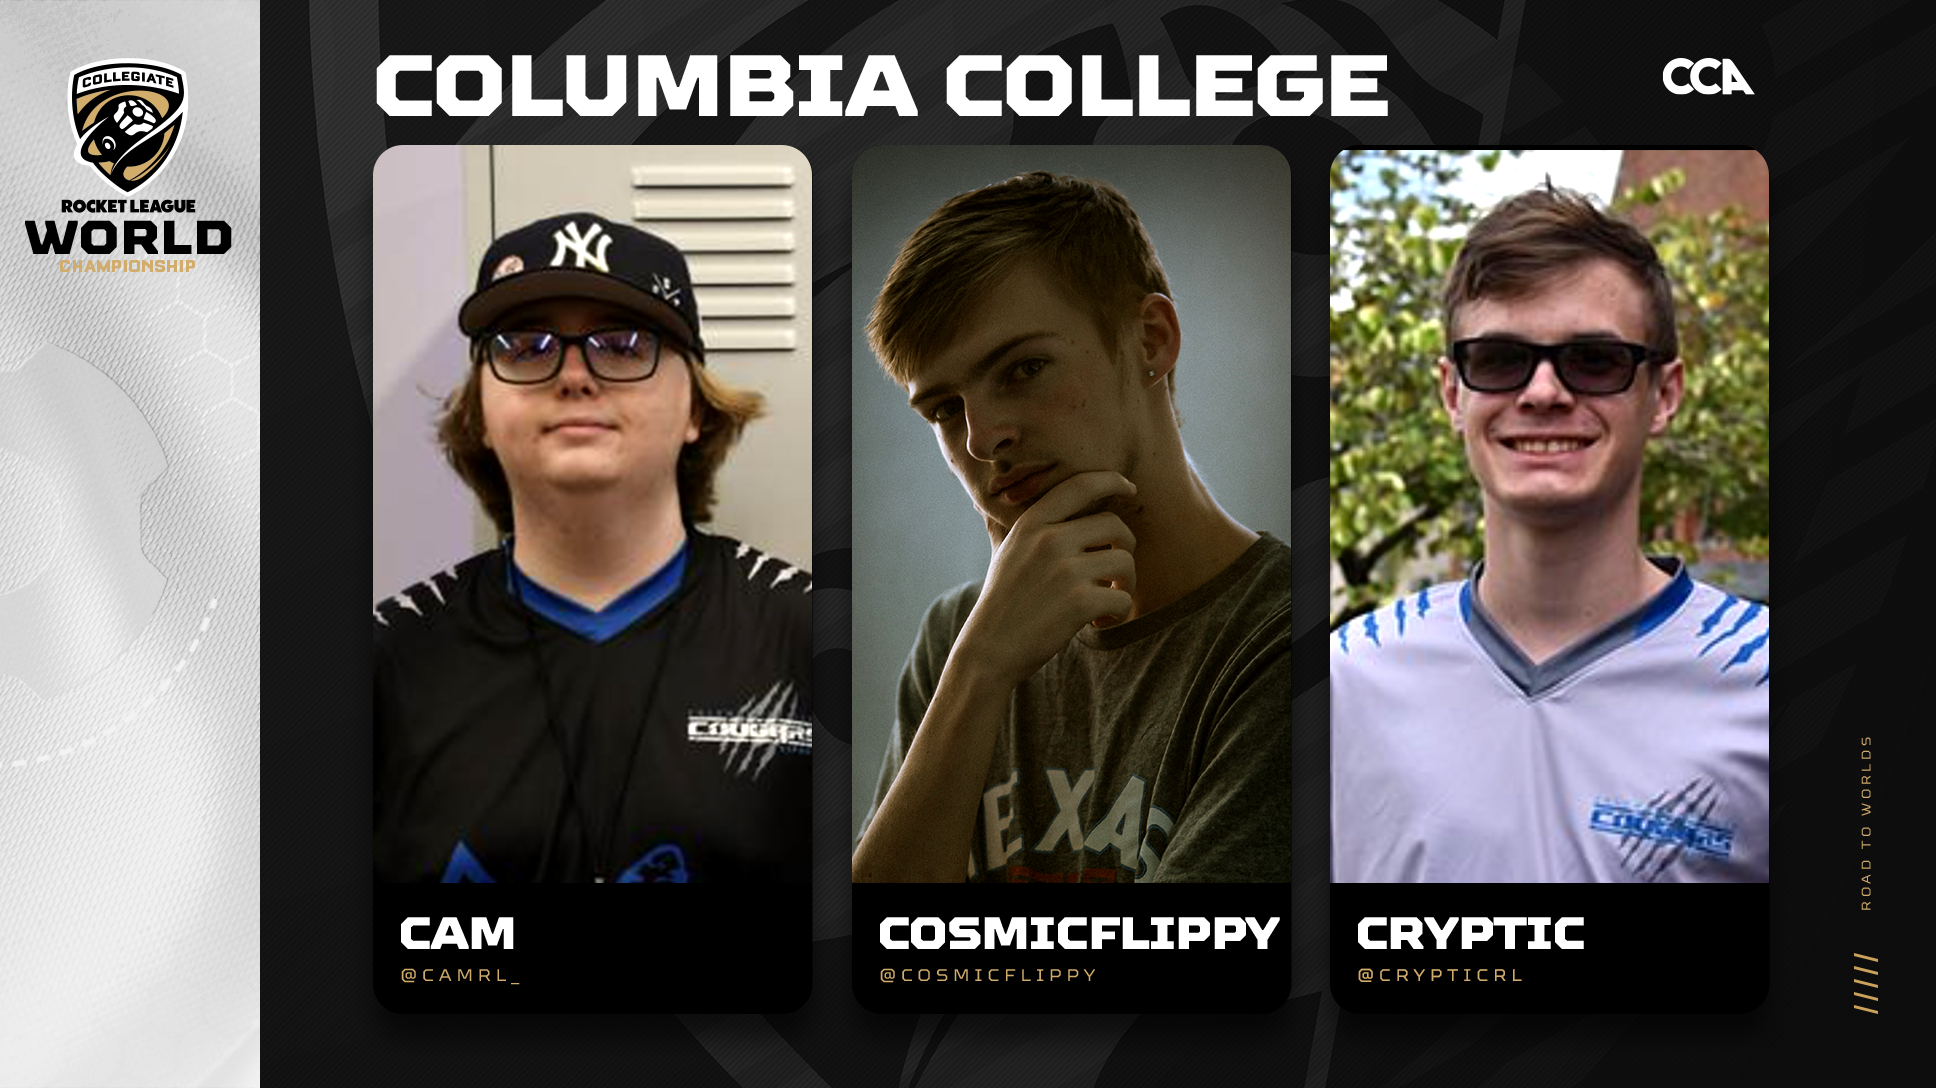 Columbia College Road to Worlds header with images of cam, CosmicFlippy, and Cryptic